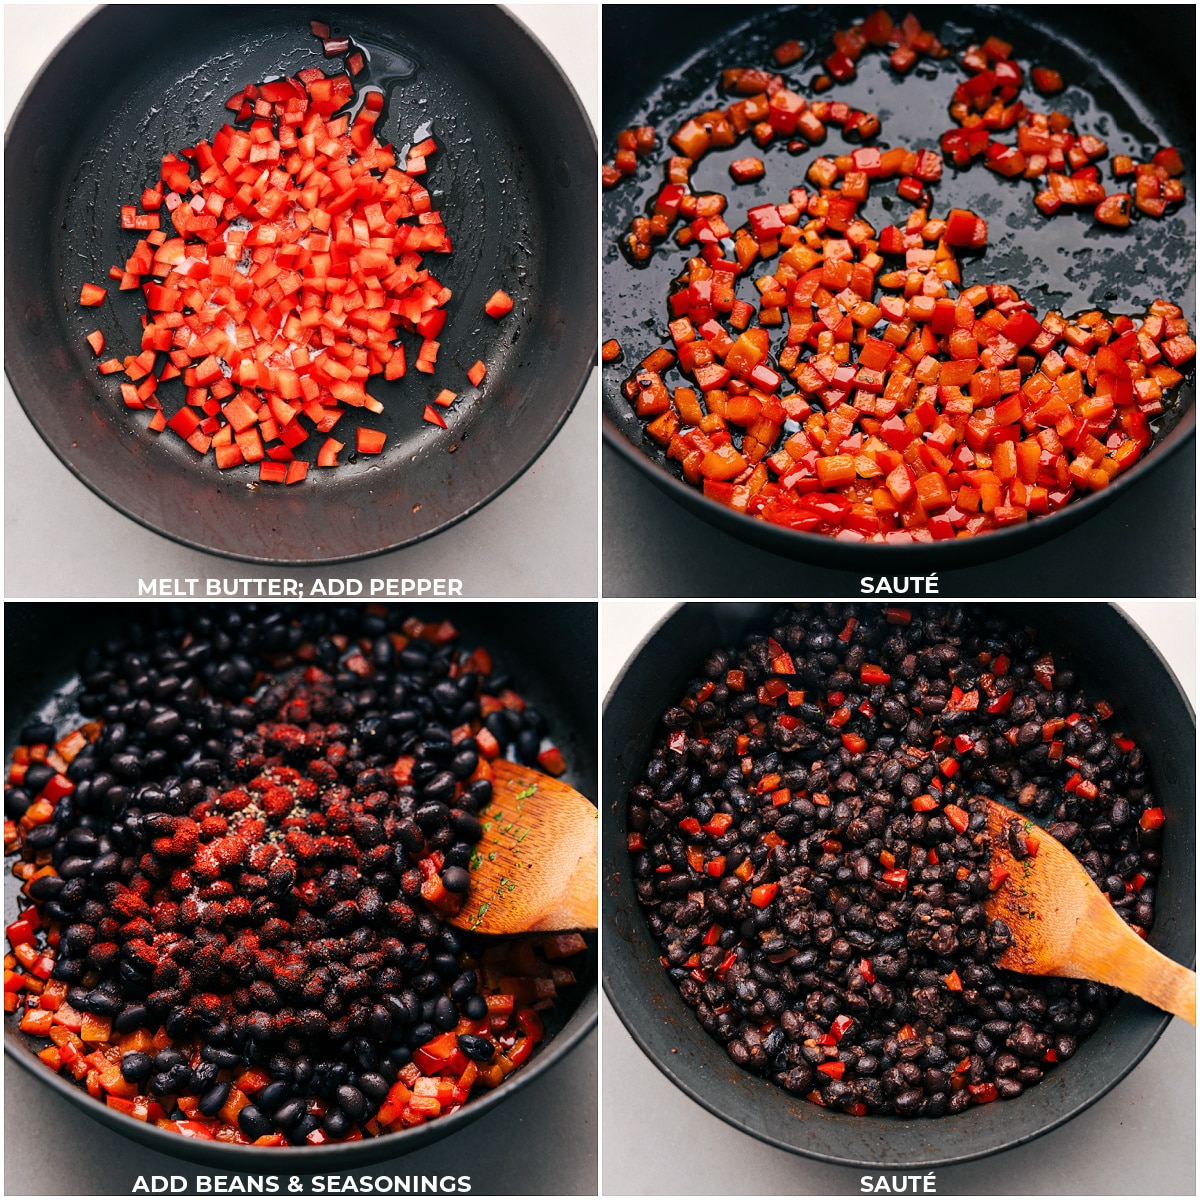 Peppers, beans, and seasonings being sautéed for these Black Bean Burrito bowls.